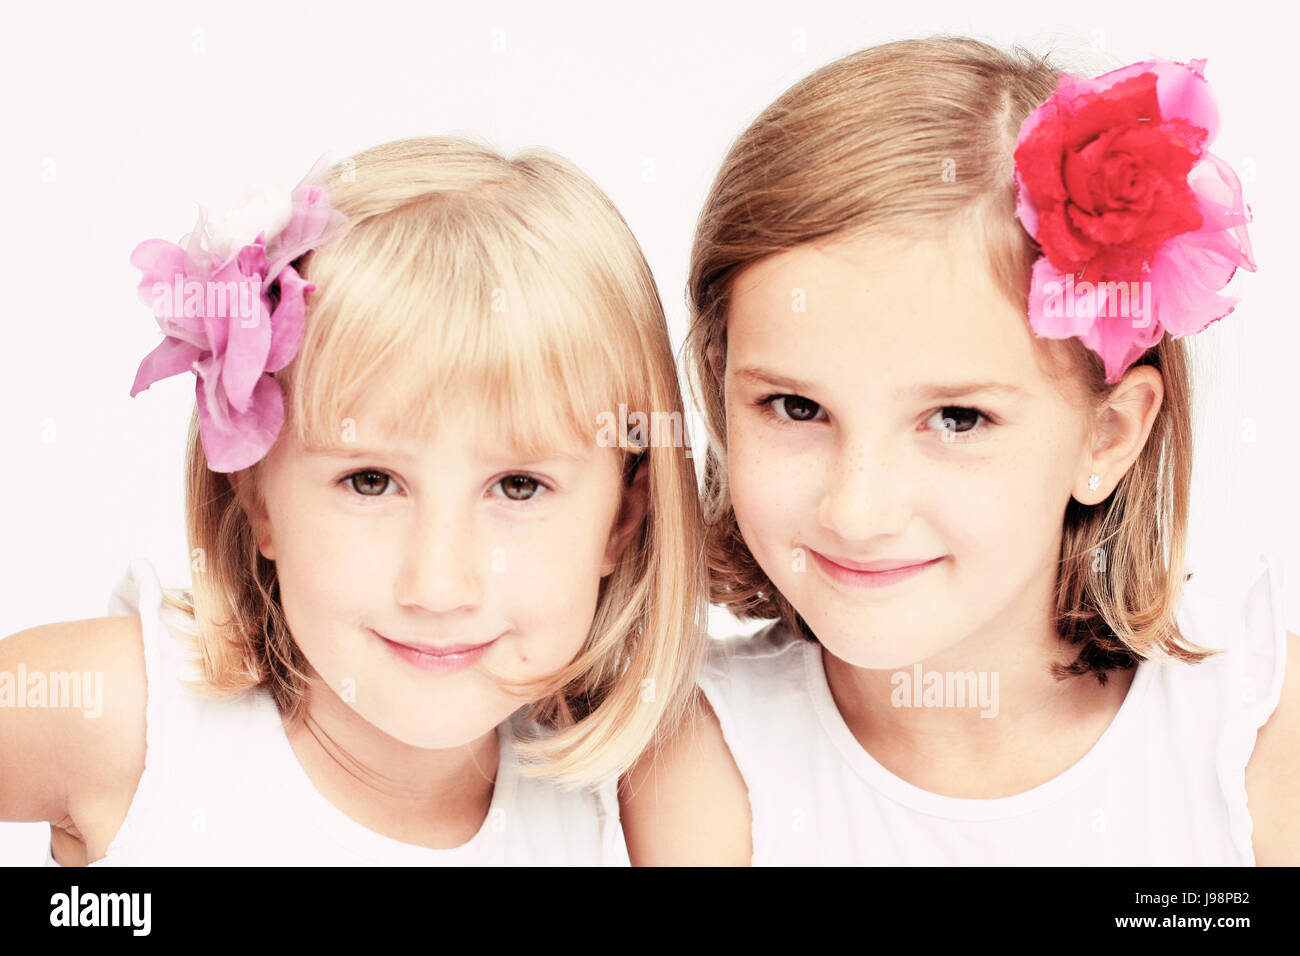 Children sitting, two girls with bobs, bob hairstyles and flowers in their  hair Stock Photo - Alamy